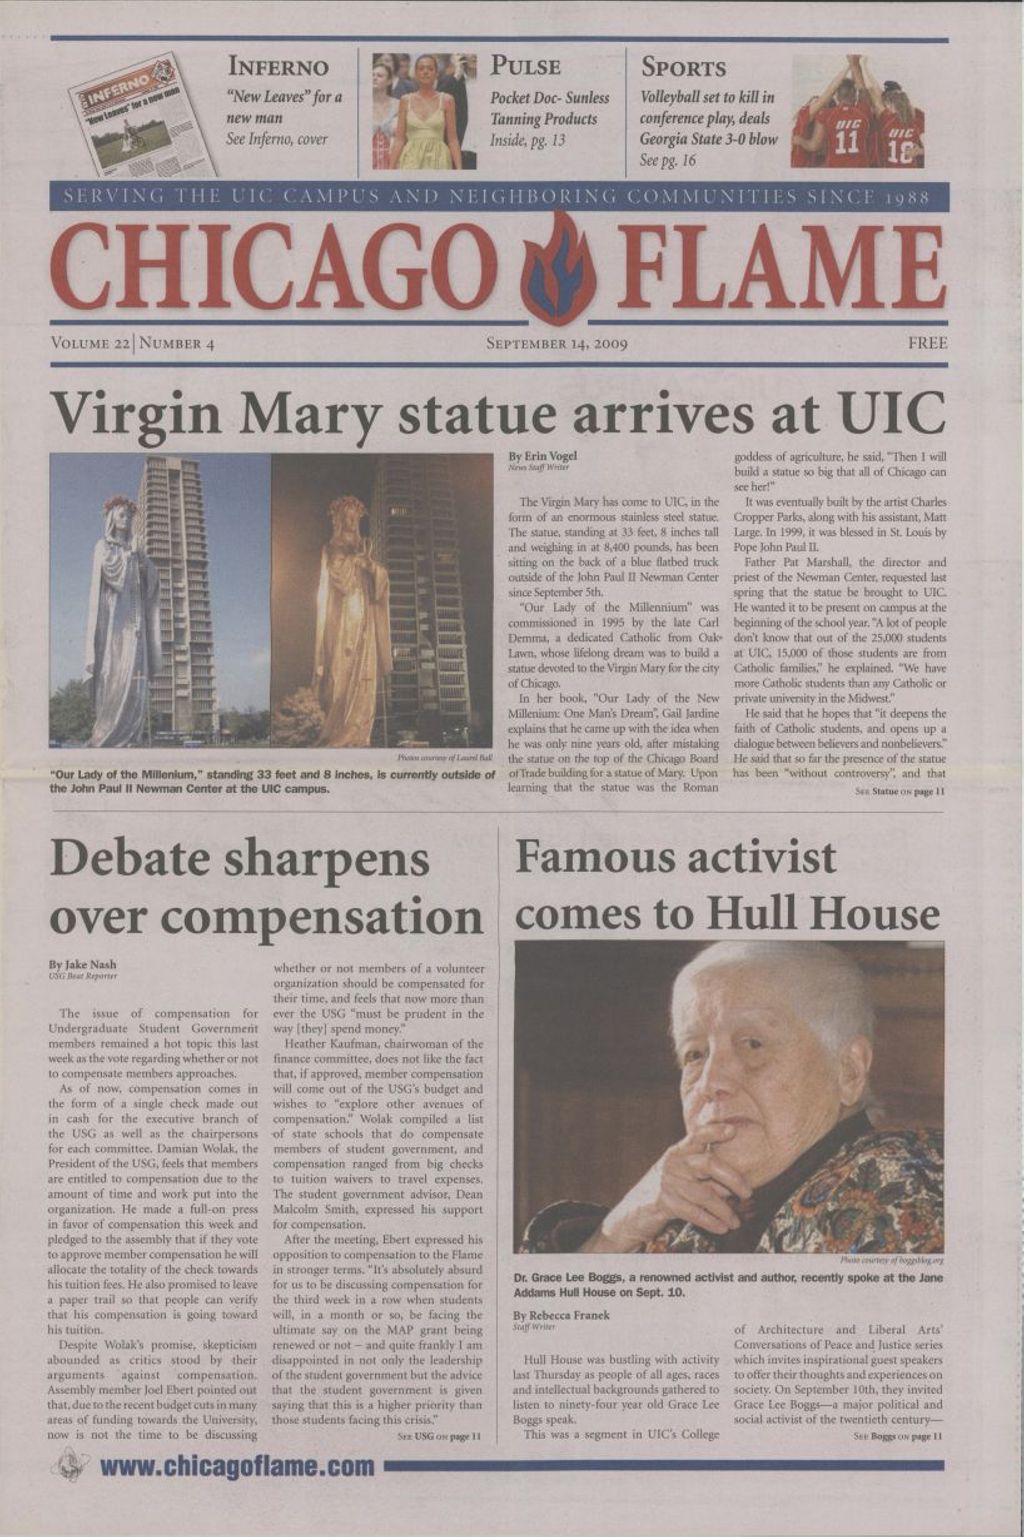 Miniature of Chicago Flame (September 14, 2009)